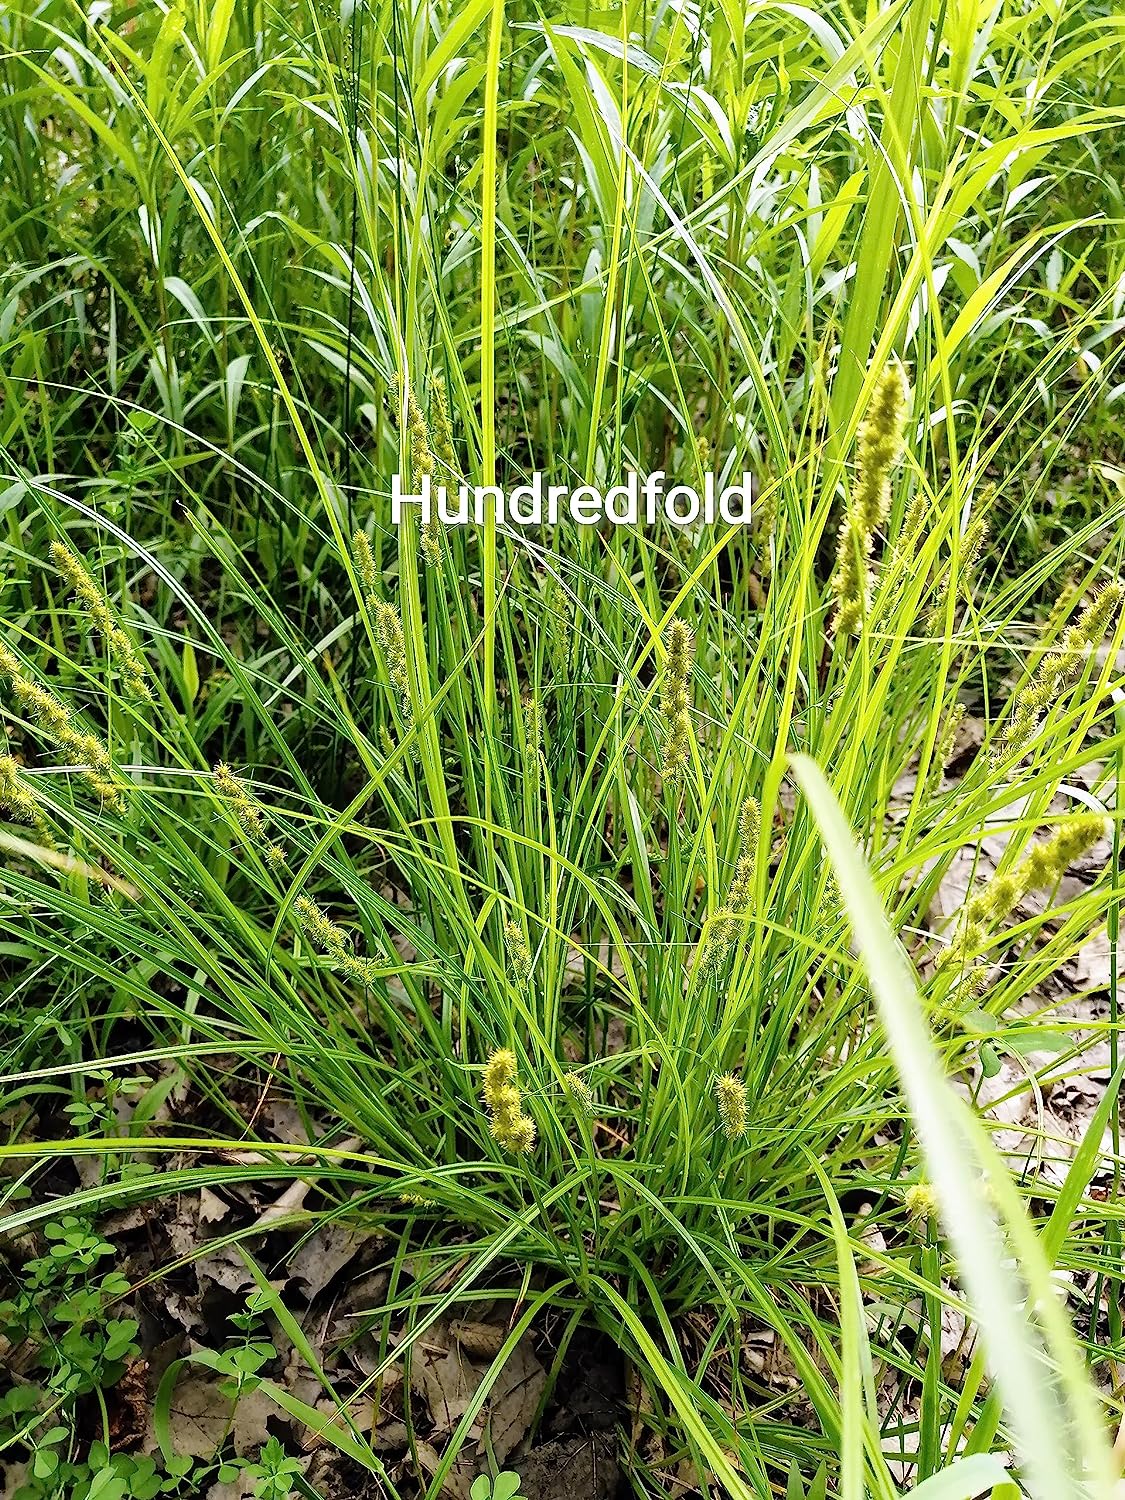 Hundredfold 500 Fox Sedge Seeds - Carex Canada Prairie Native Perennial, Ideal for Wetland, Rain Garden or Ground Cover in Shaded Areas